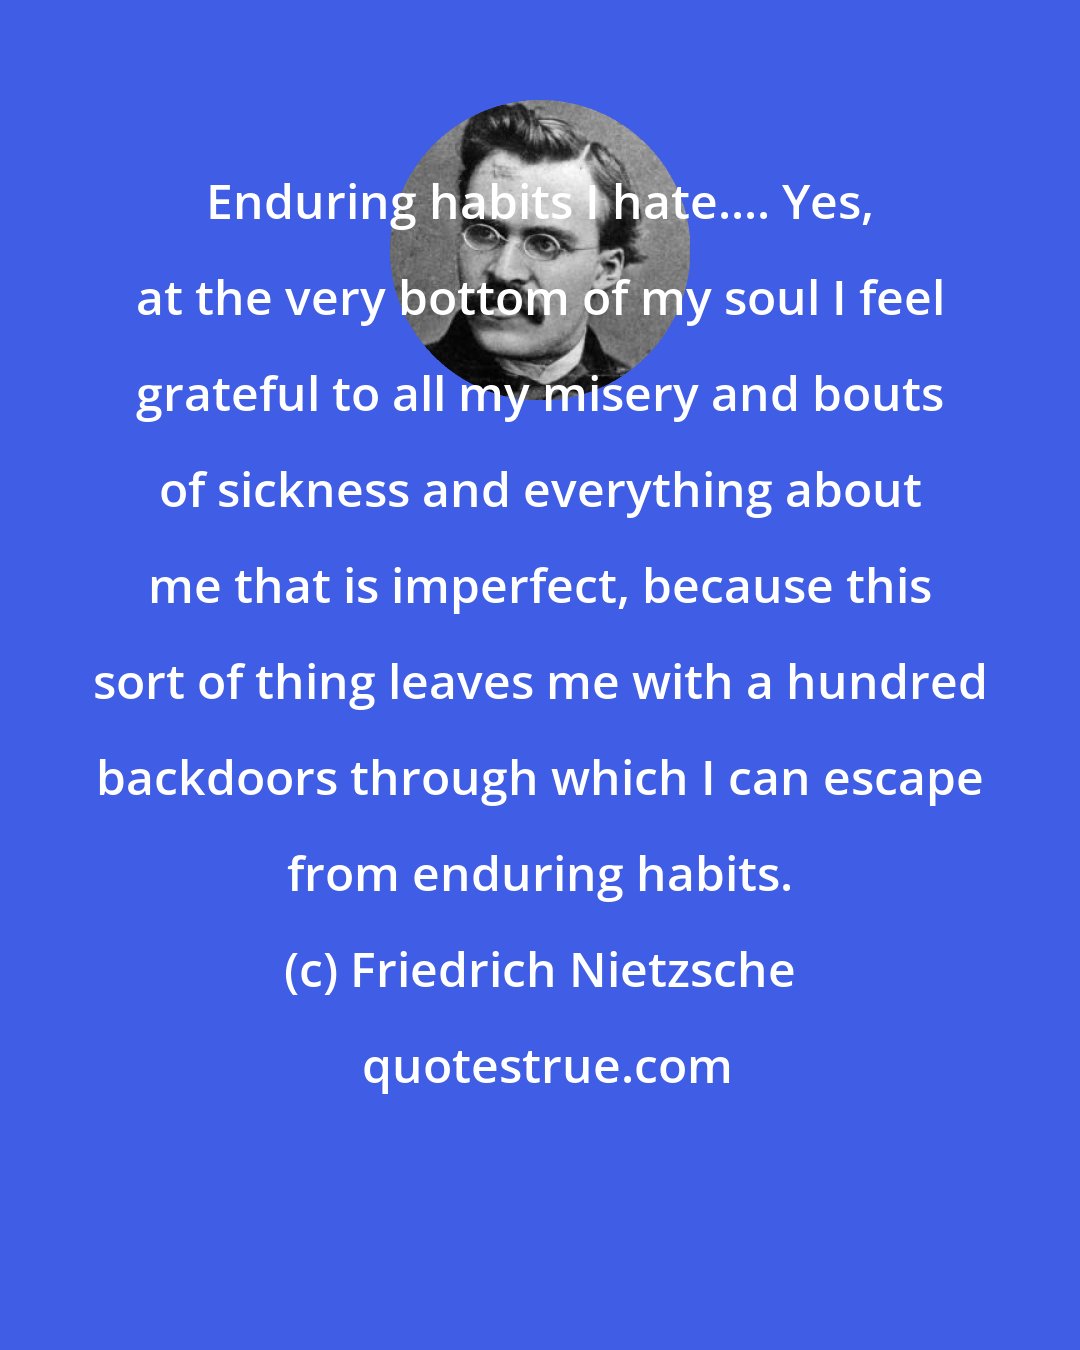 Friedrich Nietzsche: Enduring habits I hate.... Yes, at the very bottom of my soul I feel grateful to all my misery and bouts of sickness and everything about me that is imperfect, because this sort of thing leaves me with a hundred backdoors through which I can escape from enduring habits.